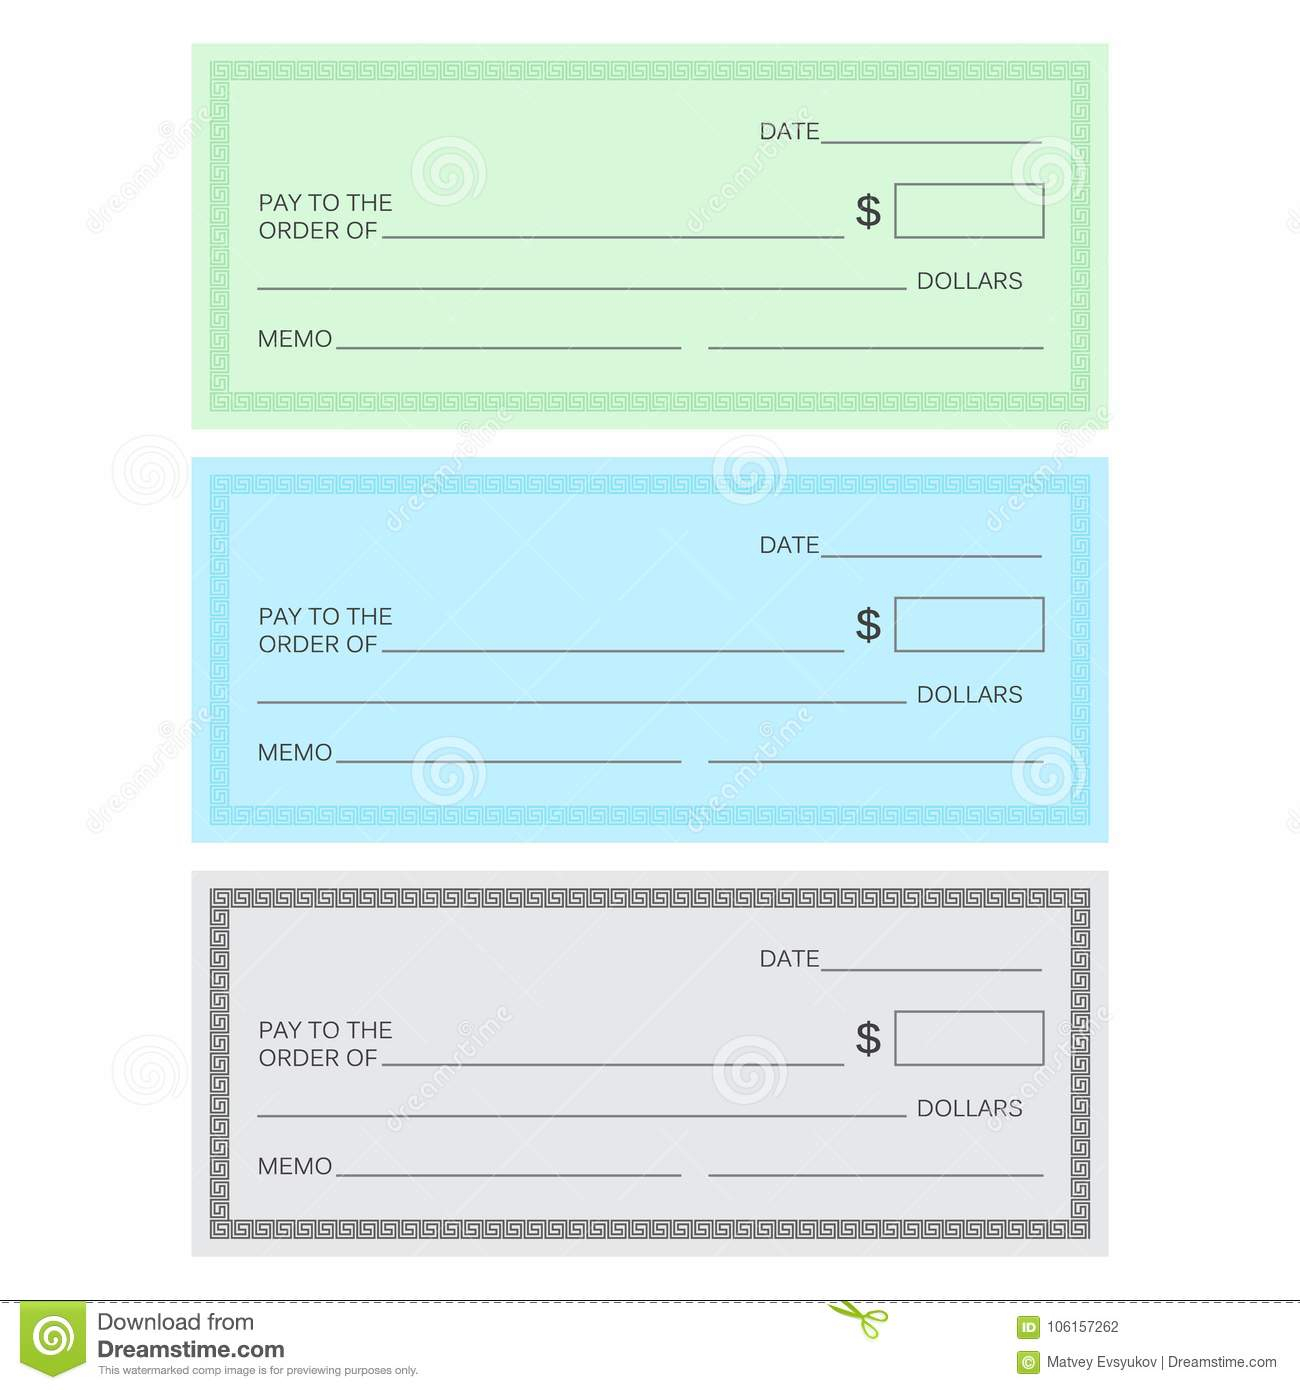 022 Blank Business Check Template Ideas Banking Templ Awful Intended For Blank Business Check Template Word